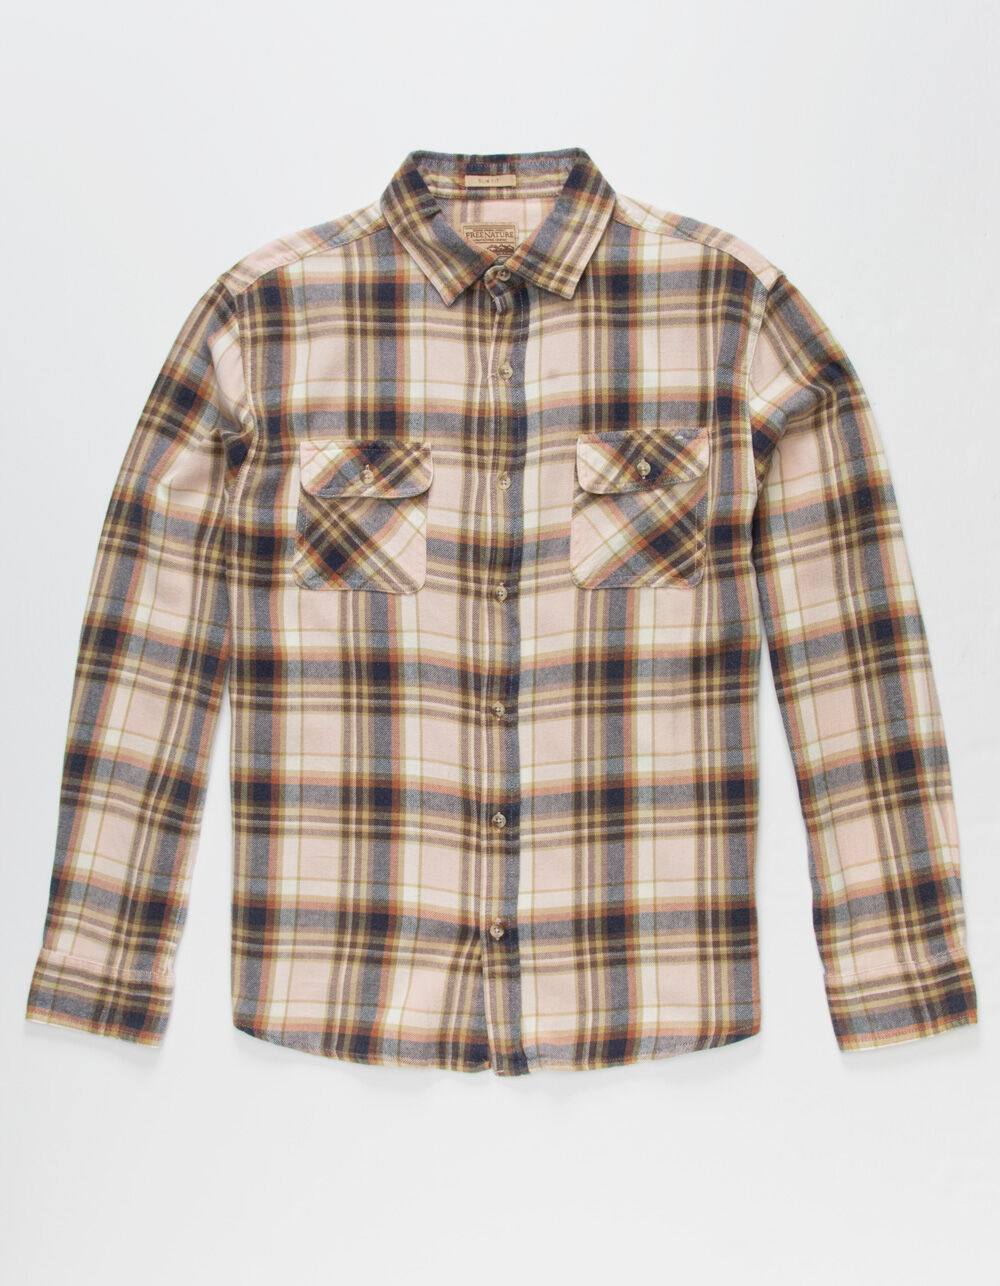 FREE NATURE Mens Plaid Flannel - PINK | Tillys